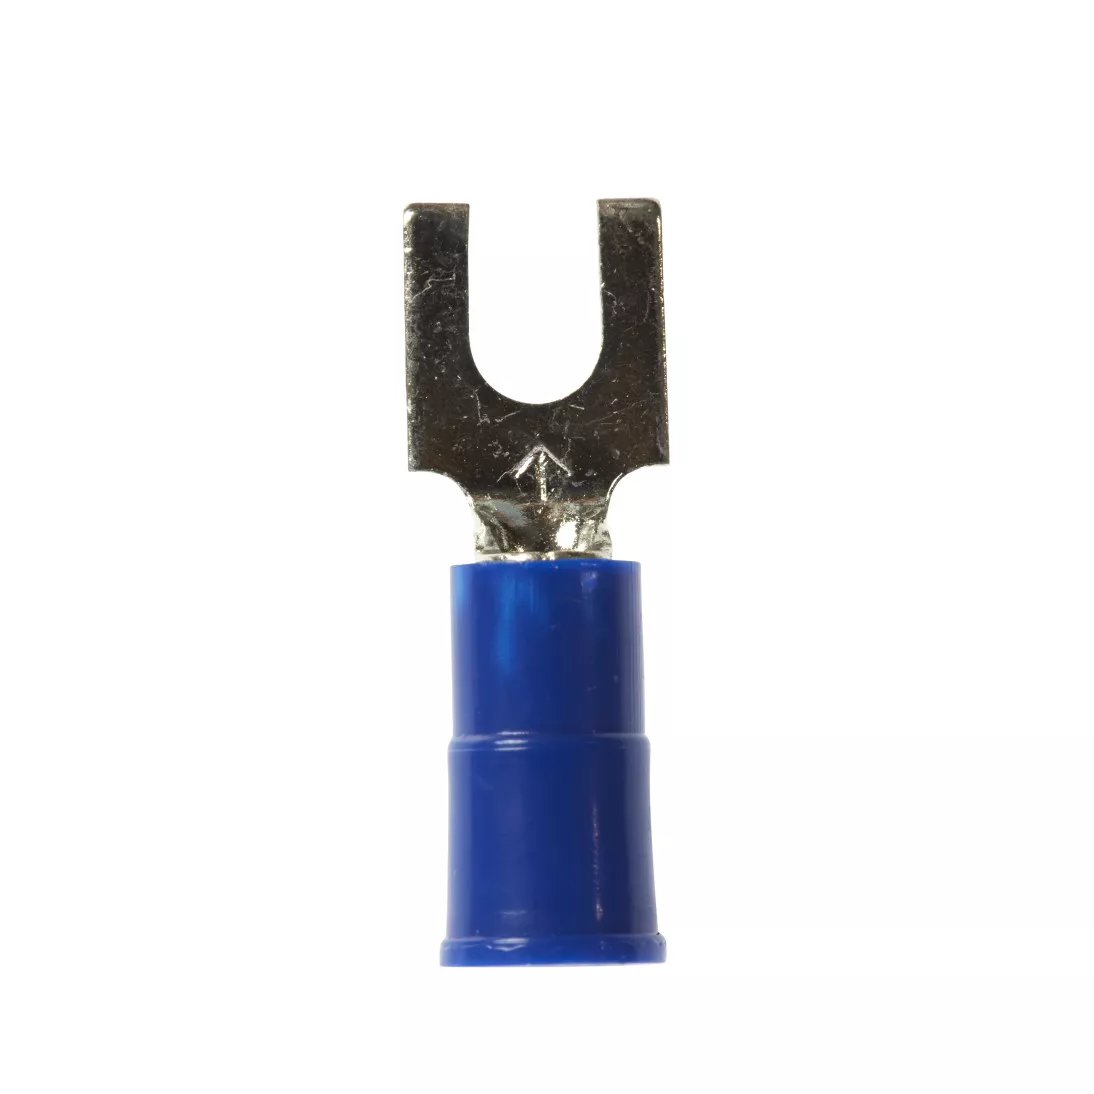 3M™ Scotchlok™ Block Fork, Vinyl Insulated Butted Seam MVU14-6FBK, Stud
Size 6, suitable for use in a terminal block, 1000/Case